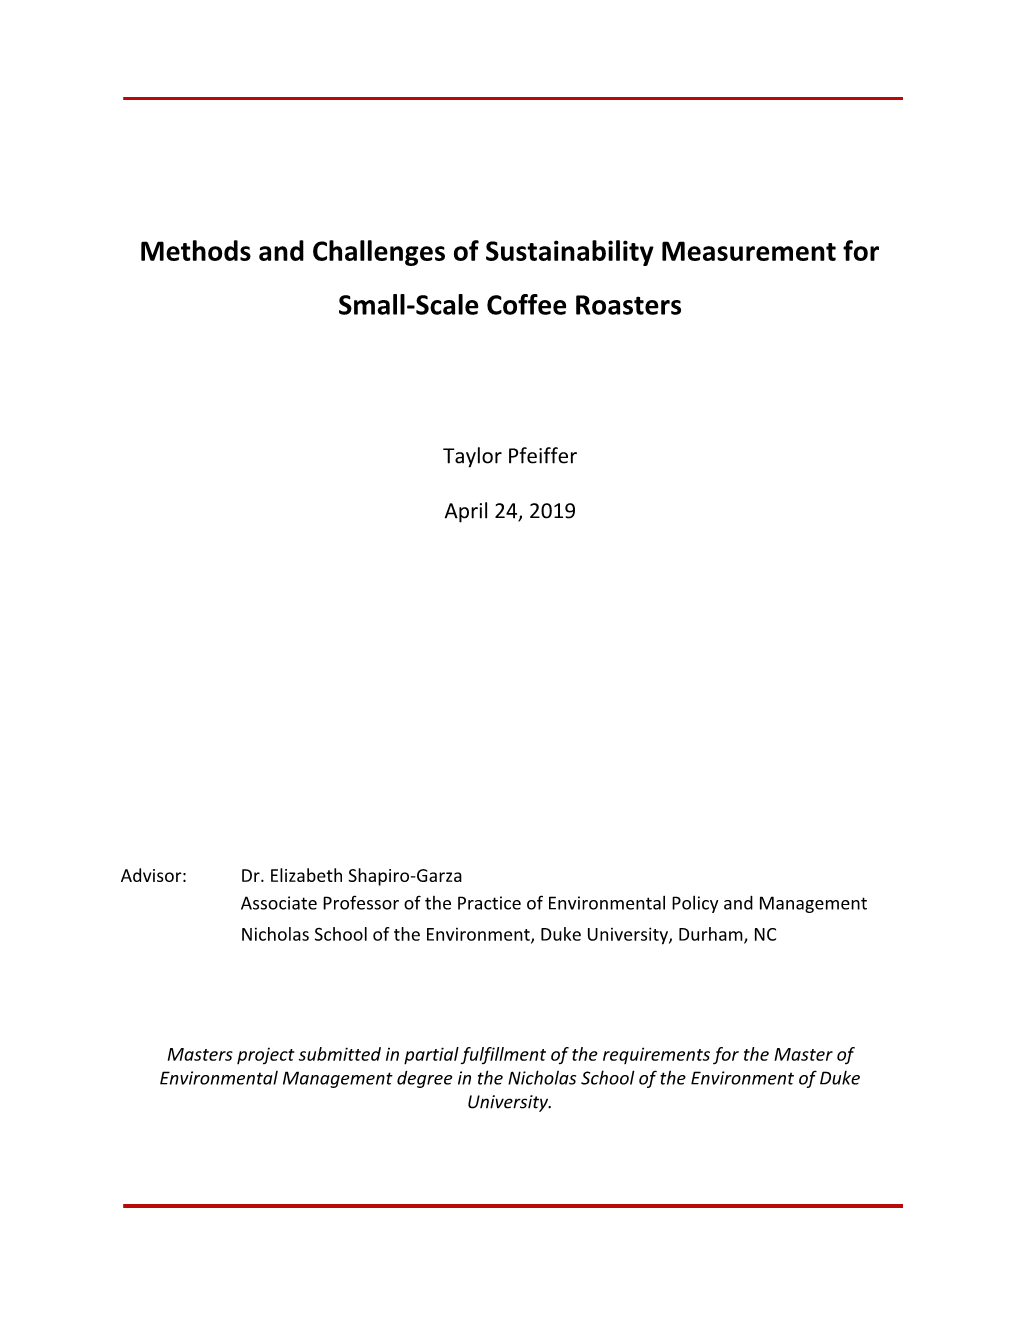 Methods and Challenges of Sustainability Measurement for Small-Scale Coffee Roasters